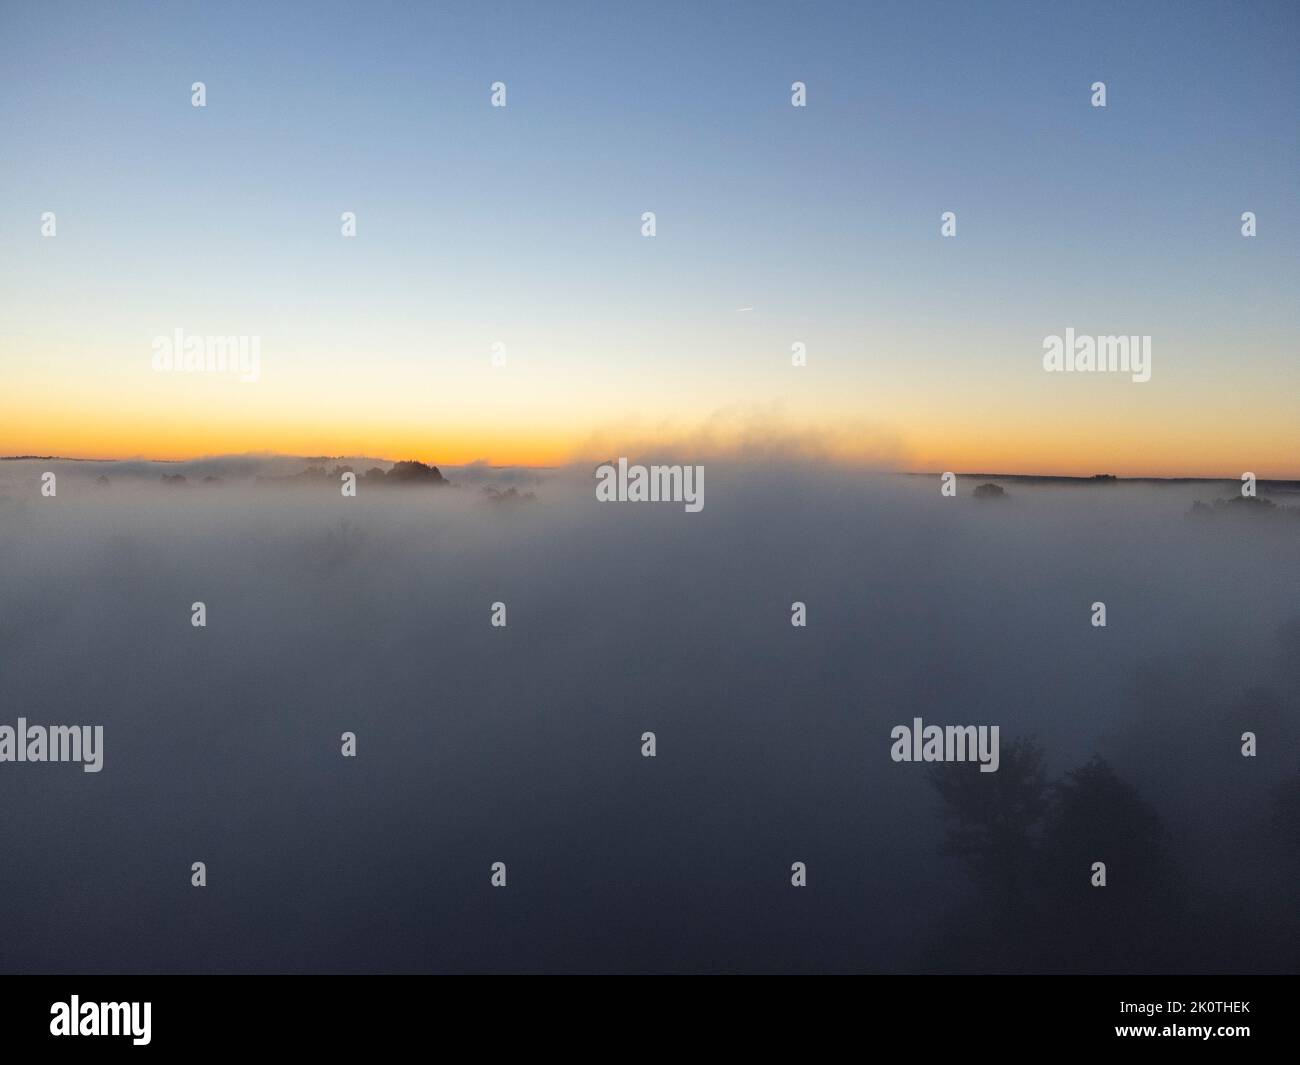 Pictures of the drone flight over the fog. River, forest, fields and meadows on a misty summer dawn. Stock Photo